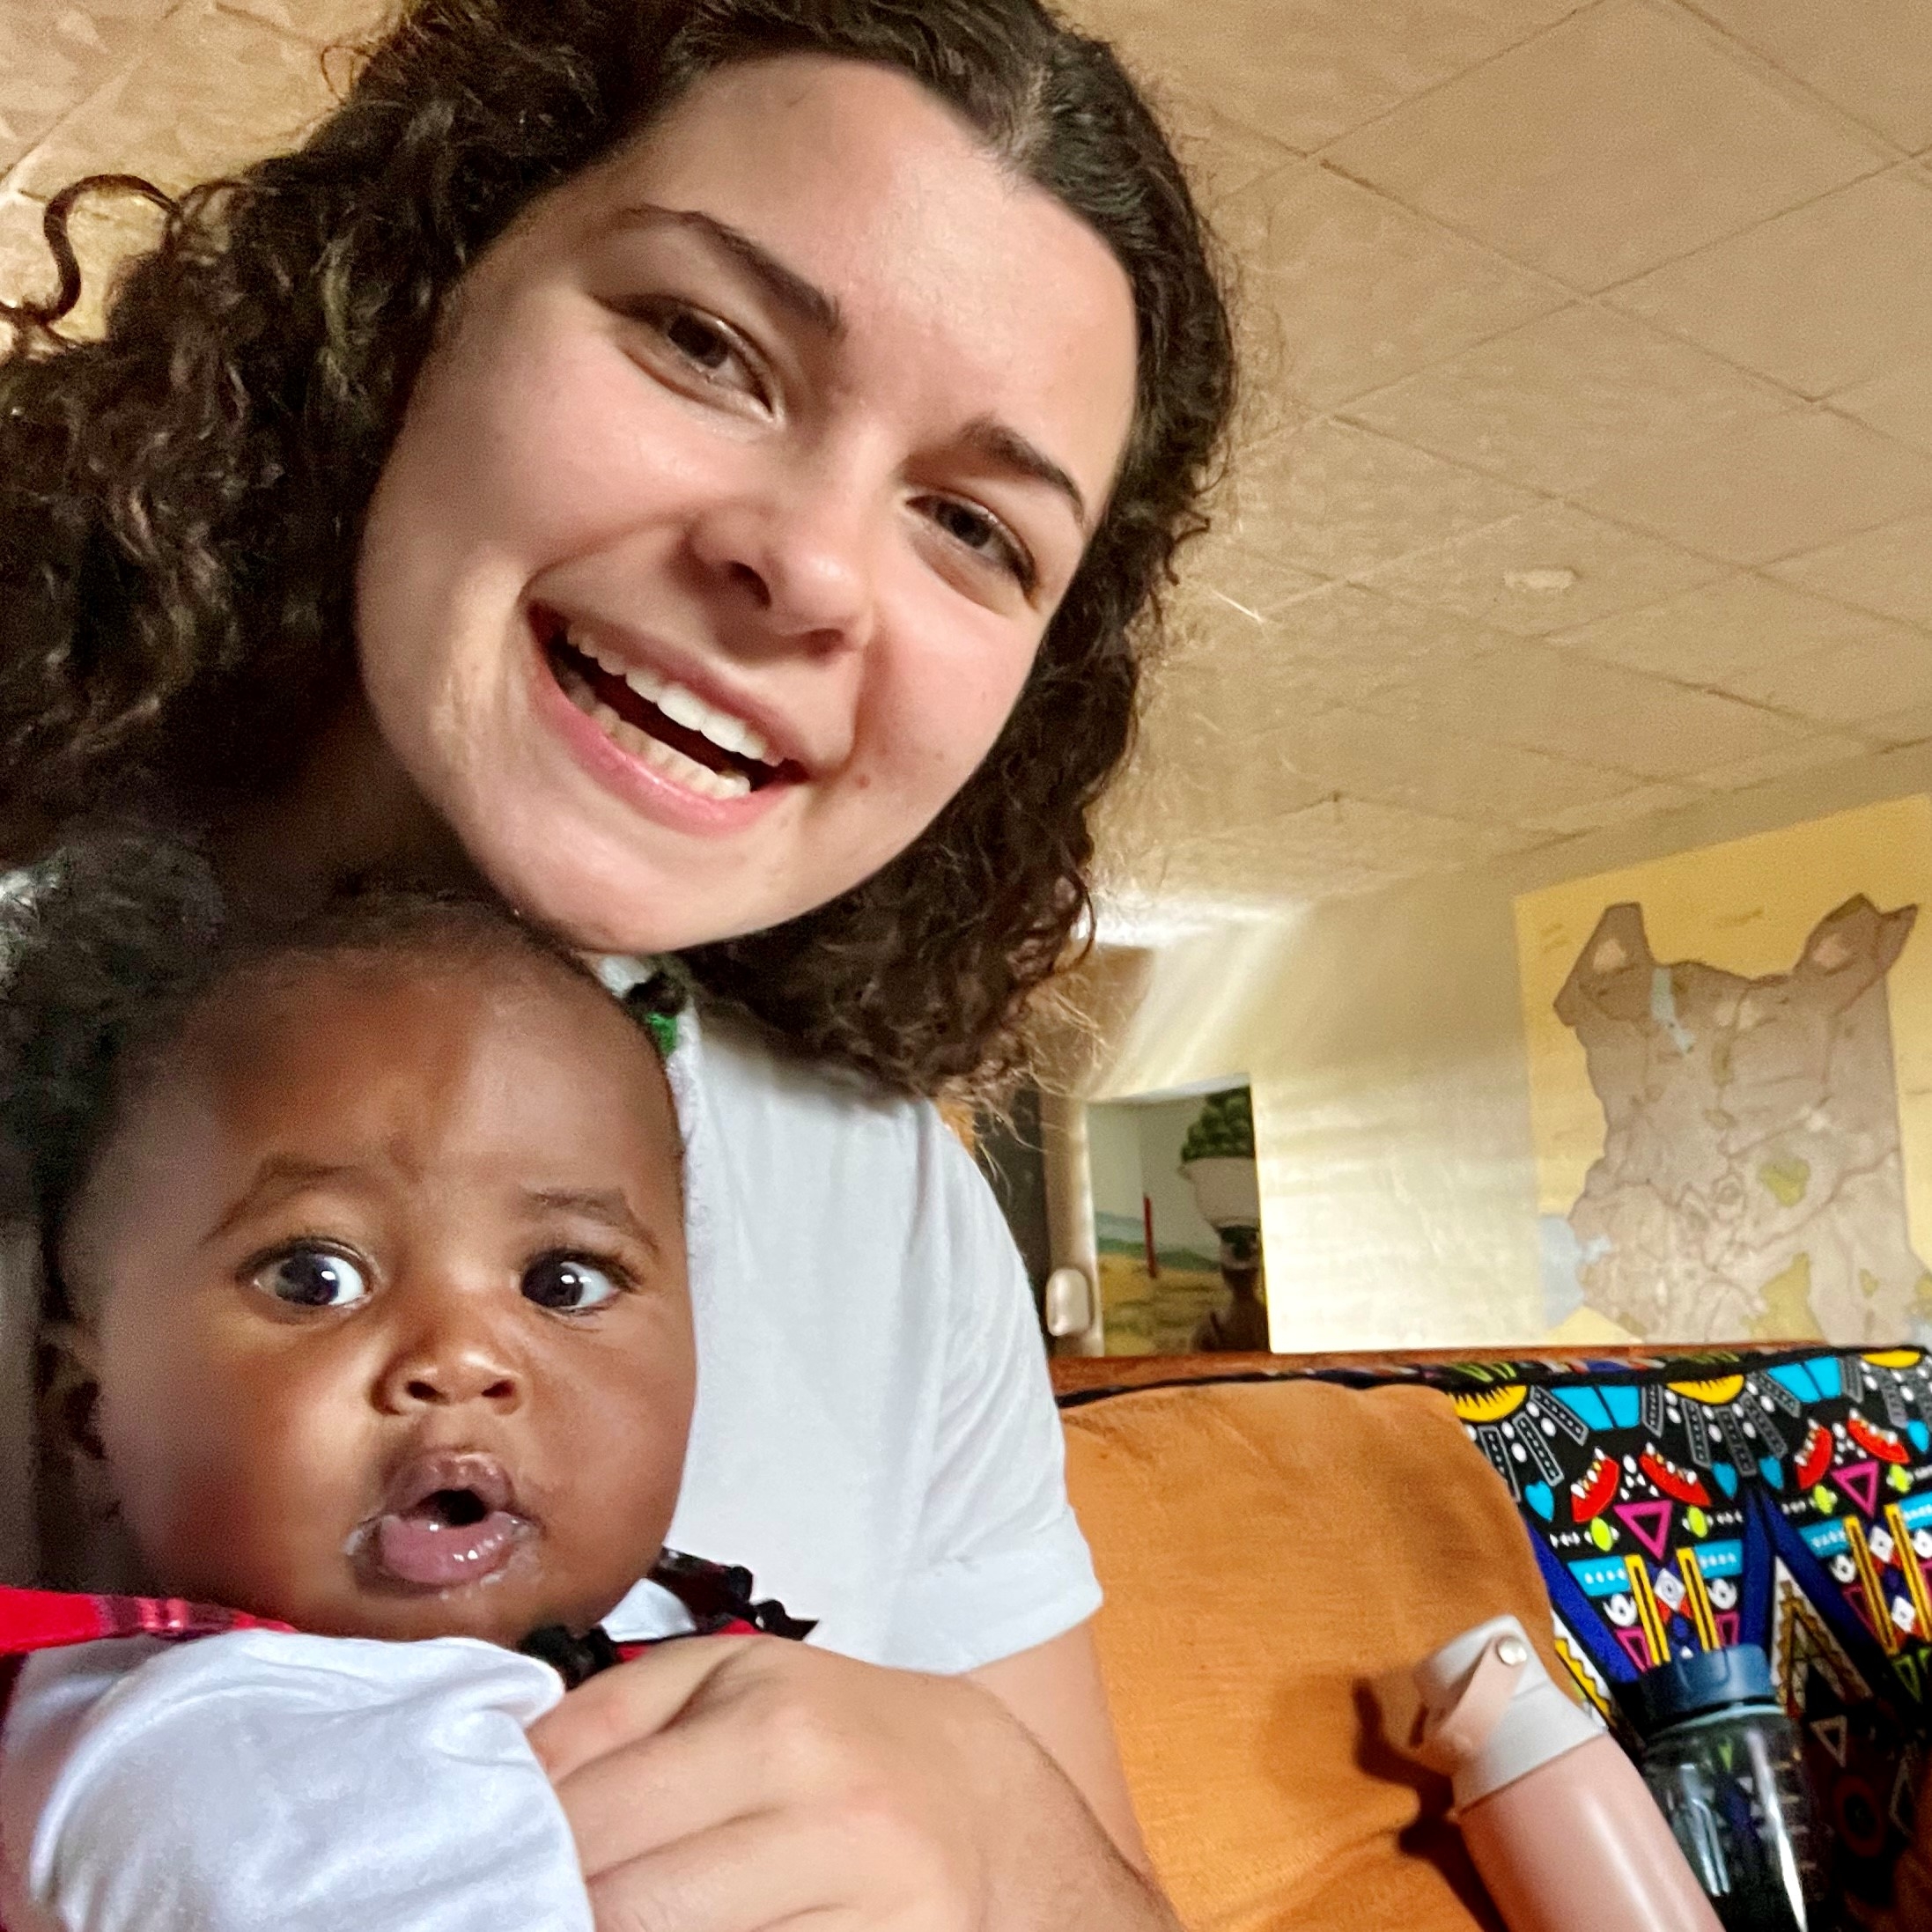 Orphan baby held by student missionary woman in Kenya, Africa